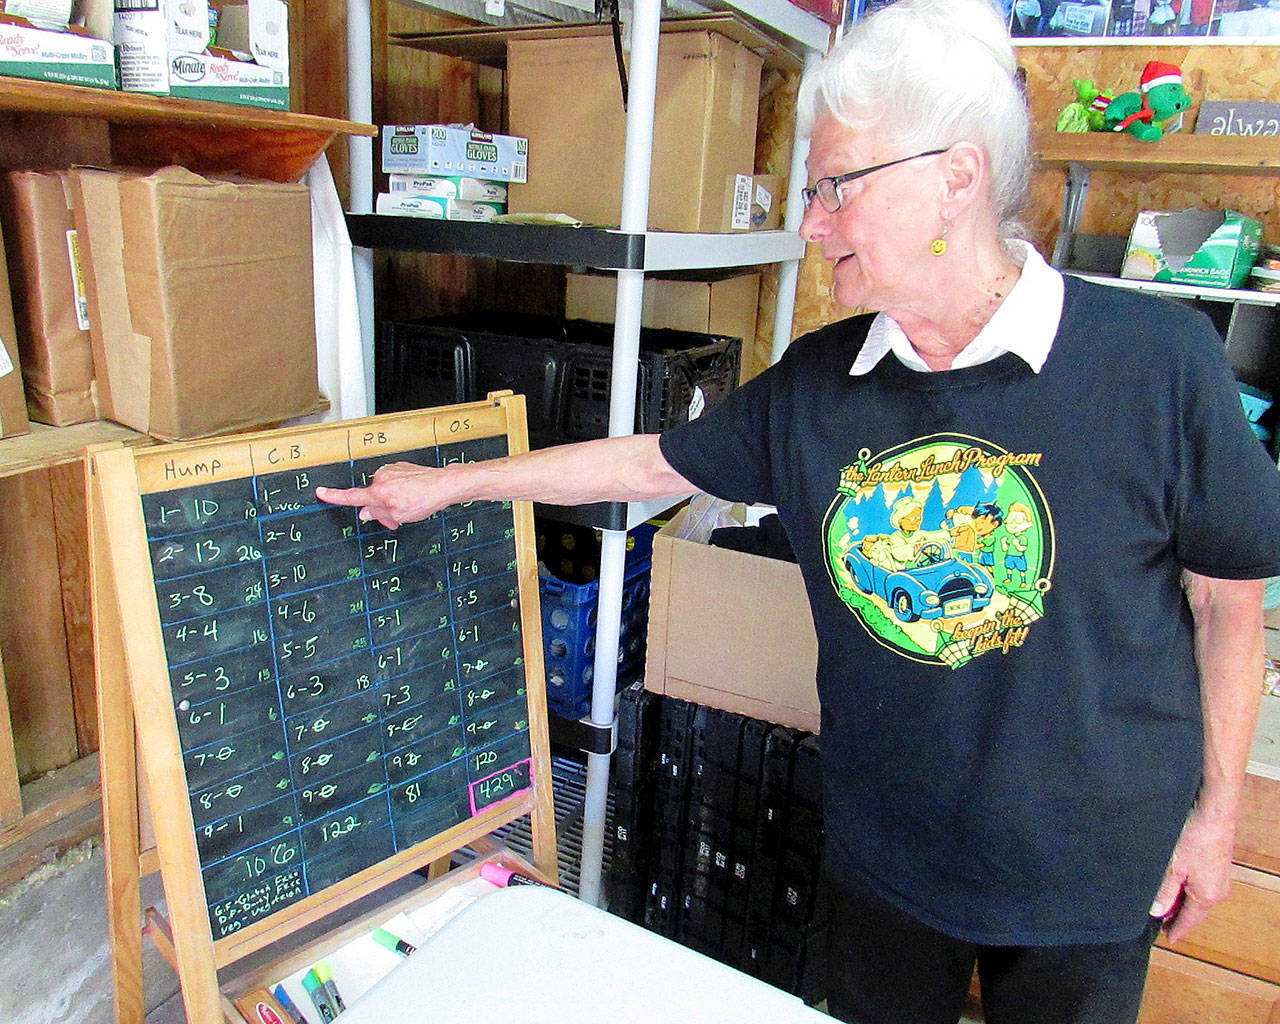 Scott D. Johnston photo: Green Lantern Lunch Program founder Phyllis Shaughnessy with the chalk board chart used to coordinate free lunch deliveries to “food insecure” students in the North Coast area.